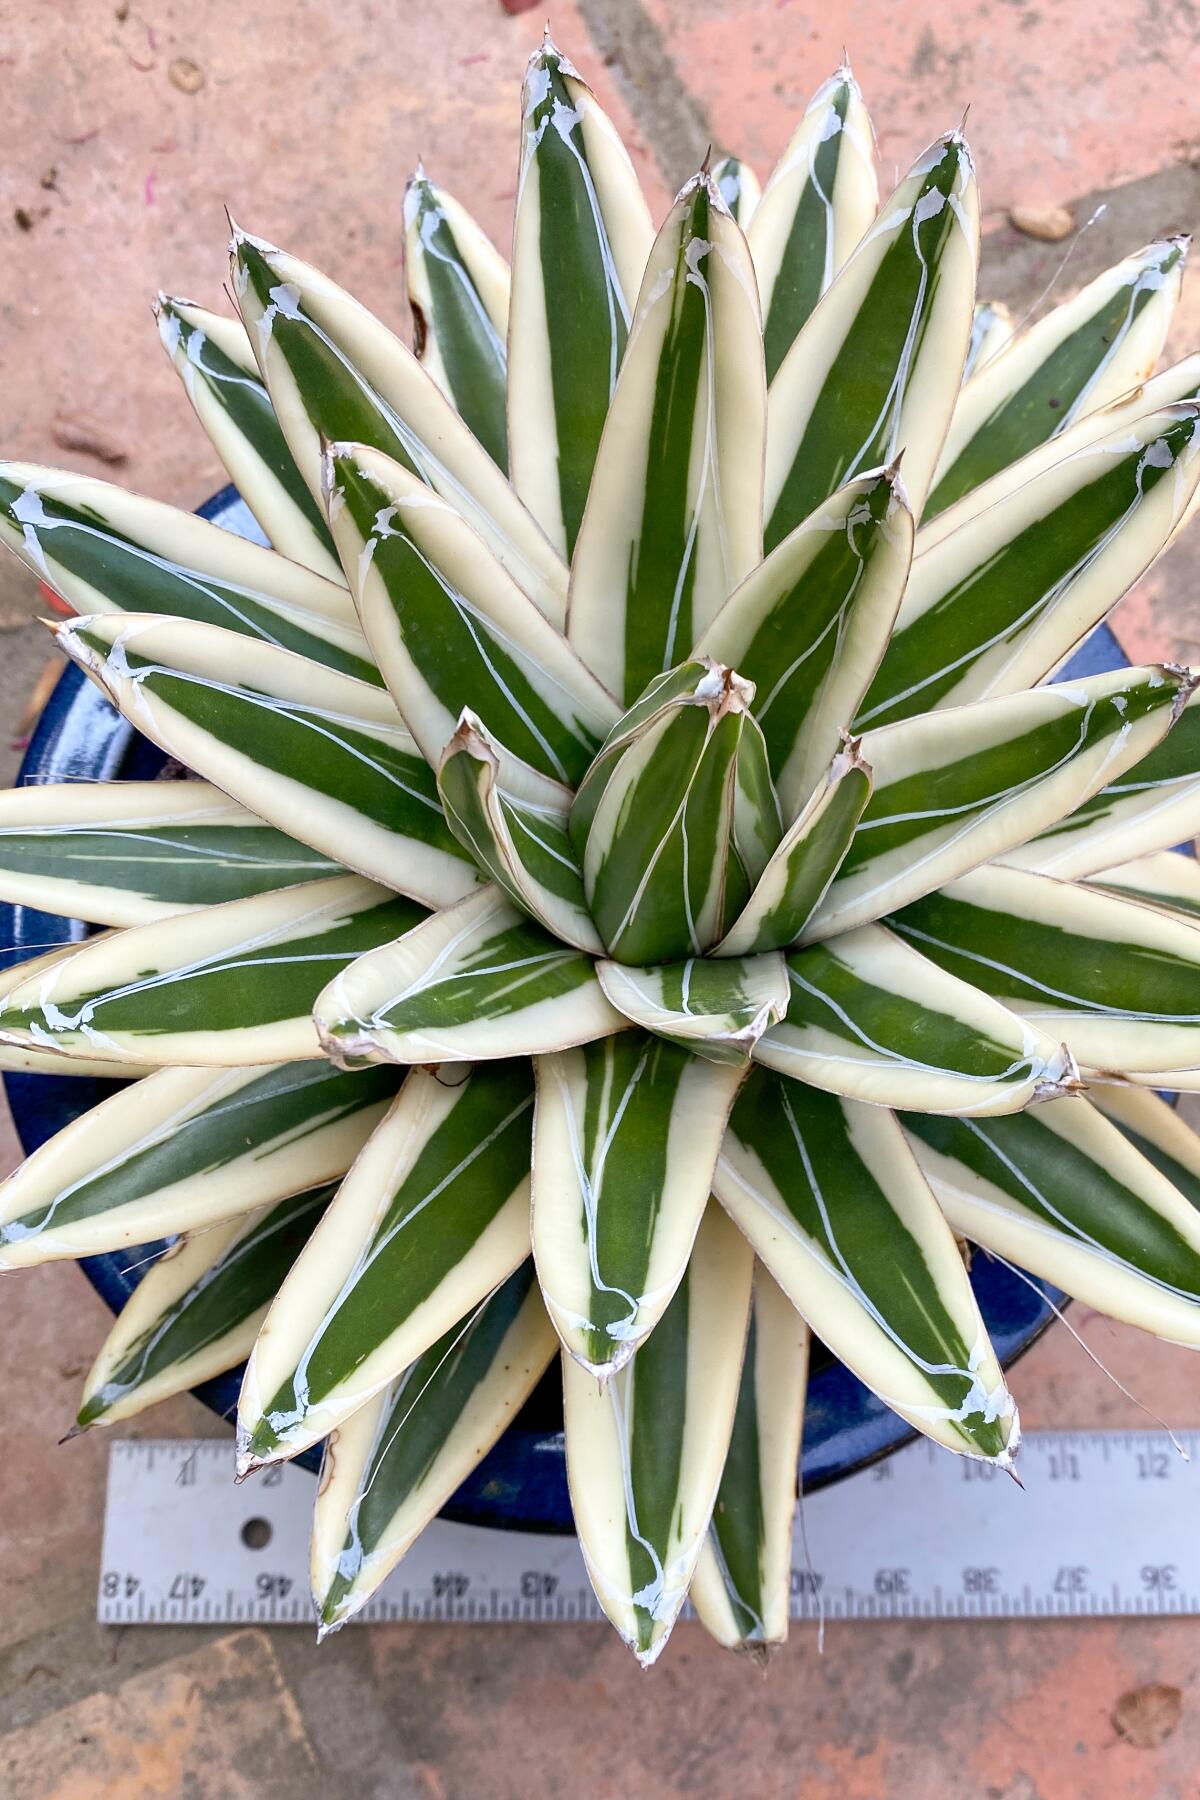 White rhino agave has grey-green spear-like leaves edged with thick cream-colored stripes.